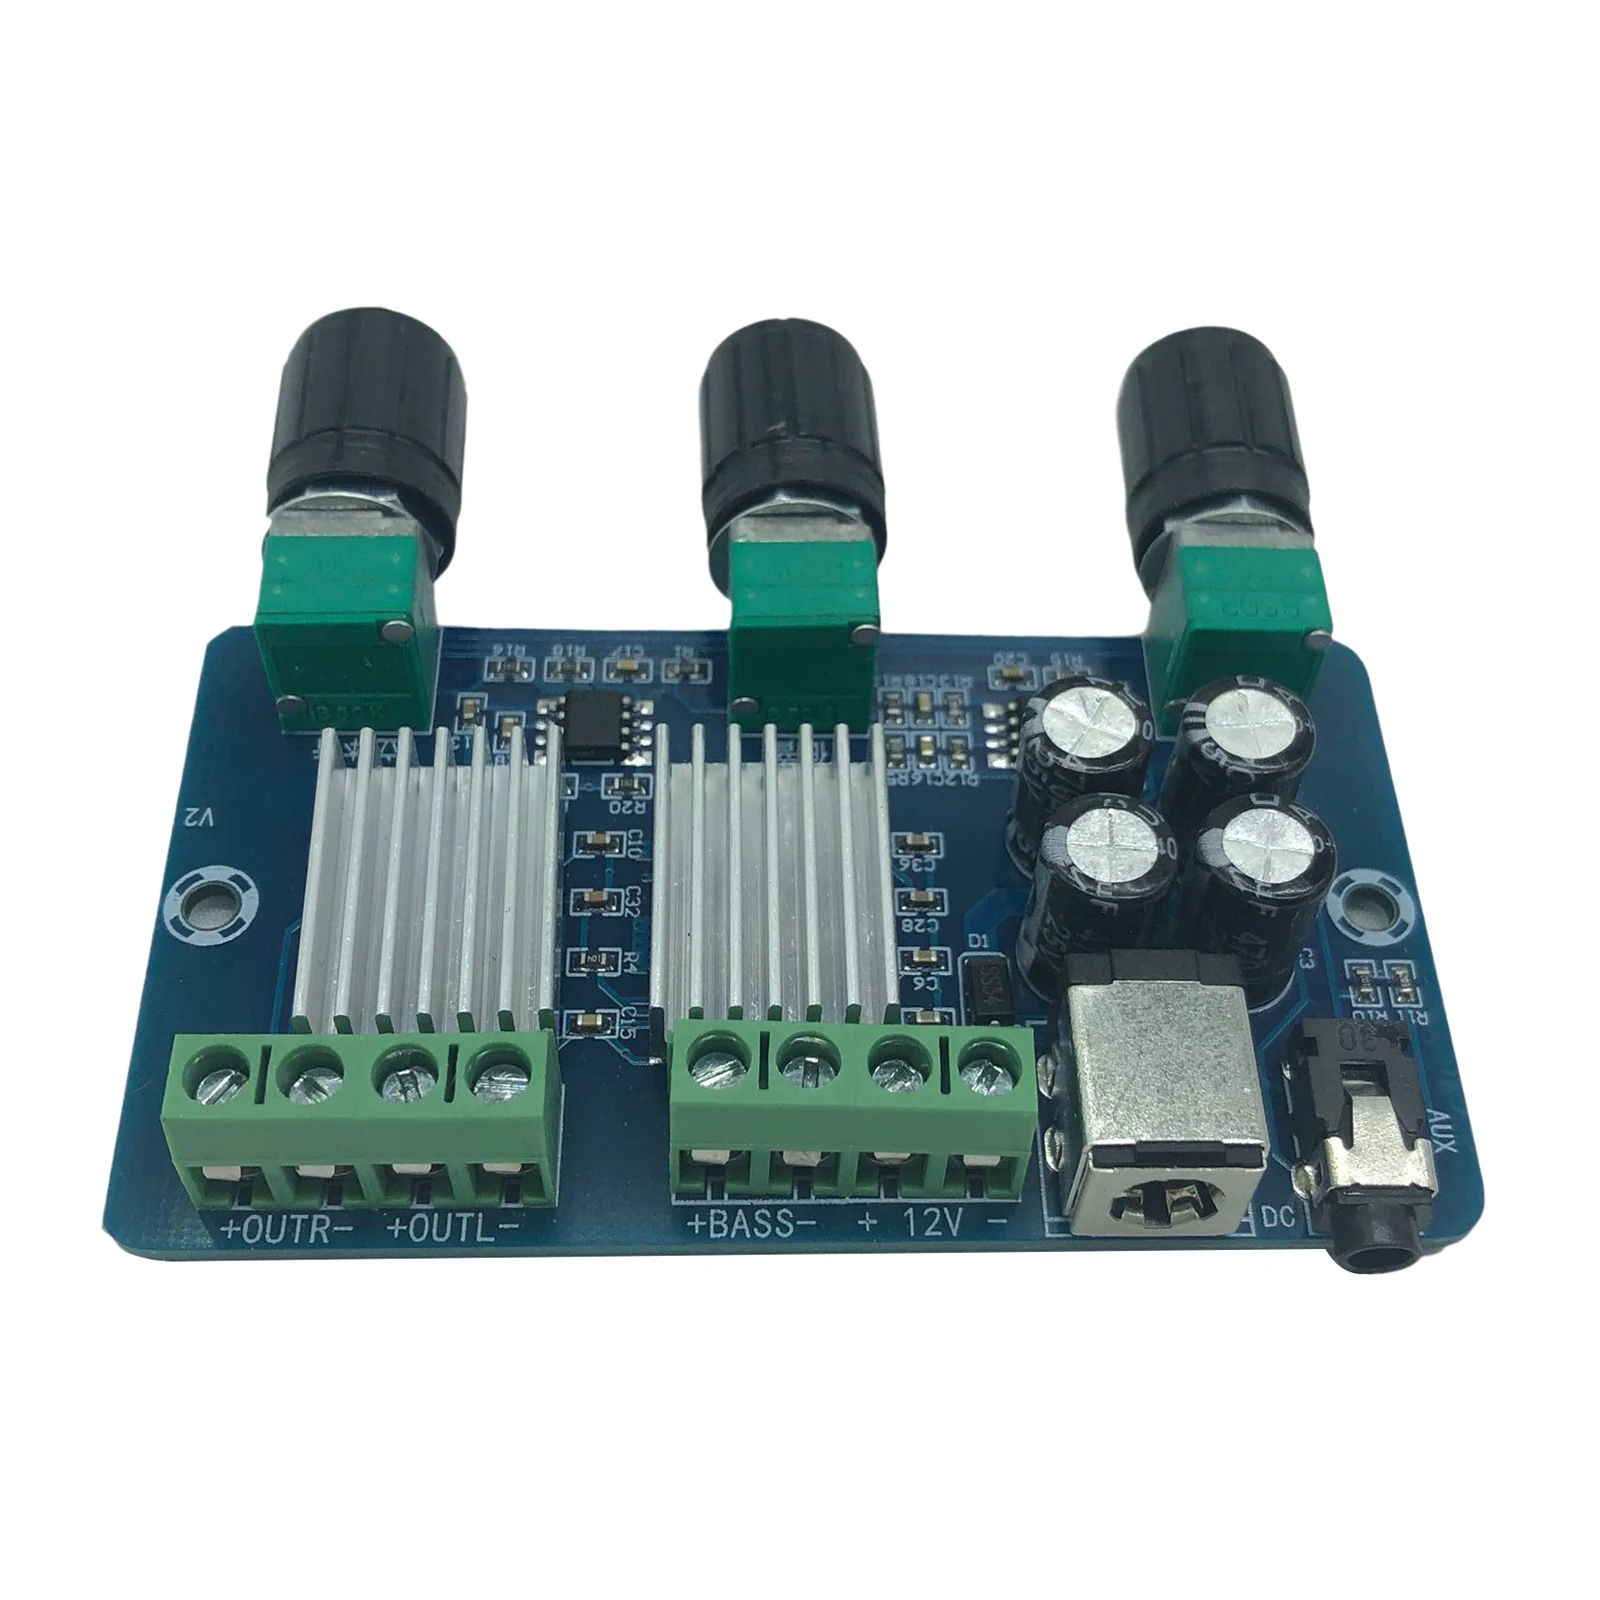 DC12V XH-A355 2.1 Channel Digital Stereo Audio Power Amplifier Board AMP